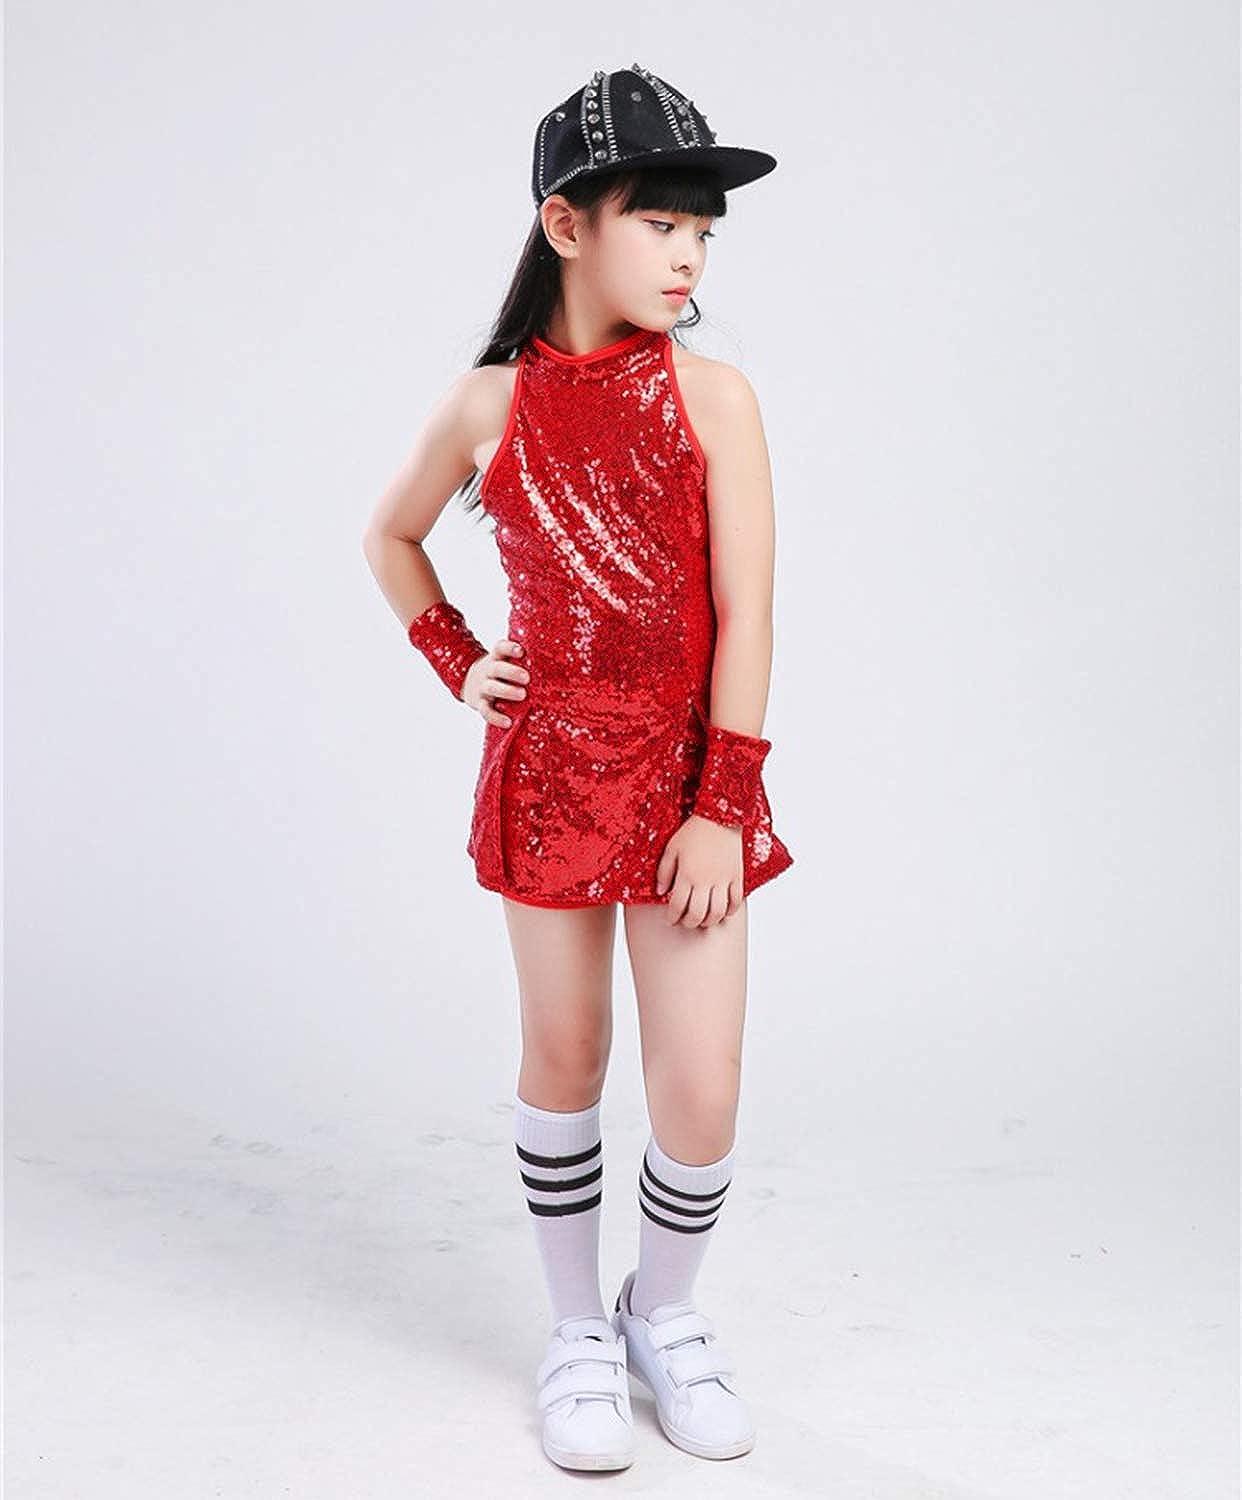 LOLANTA Girls Sequins Dance Clothes Dress 4-12 Yrs Sparkle Hip Hop Jazz  Dance Outfit, Sleeveless Top and Shorts Red 8-9 Years